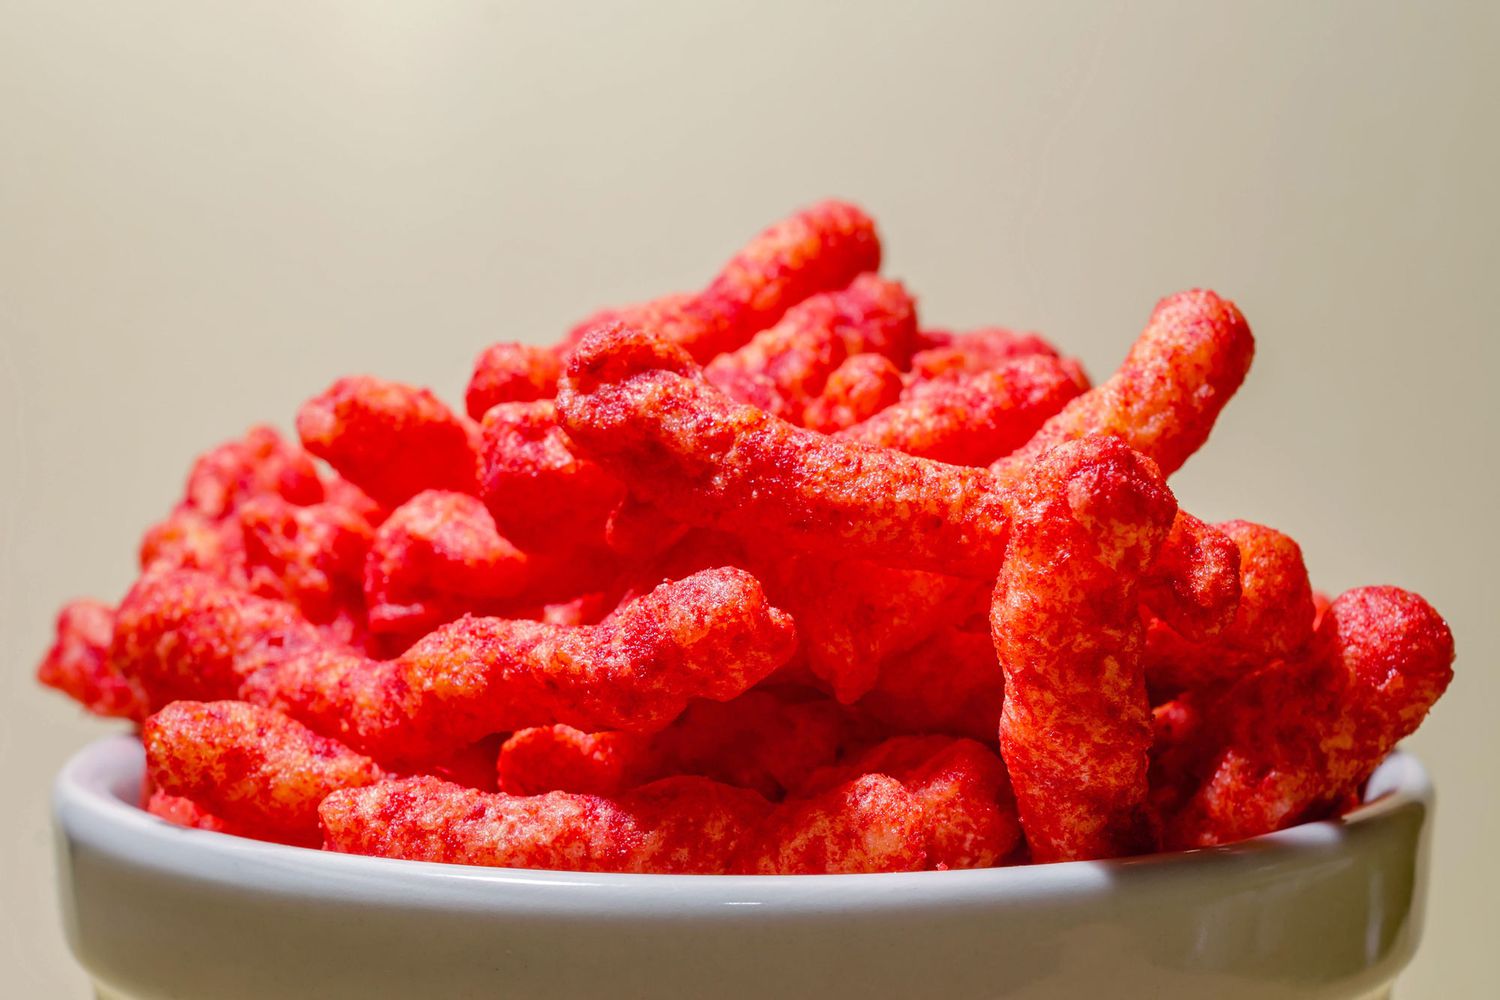 Dogs Go Crazy For Hot Cheetos! Find Out If It's Safe For Them To Eat.